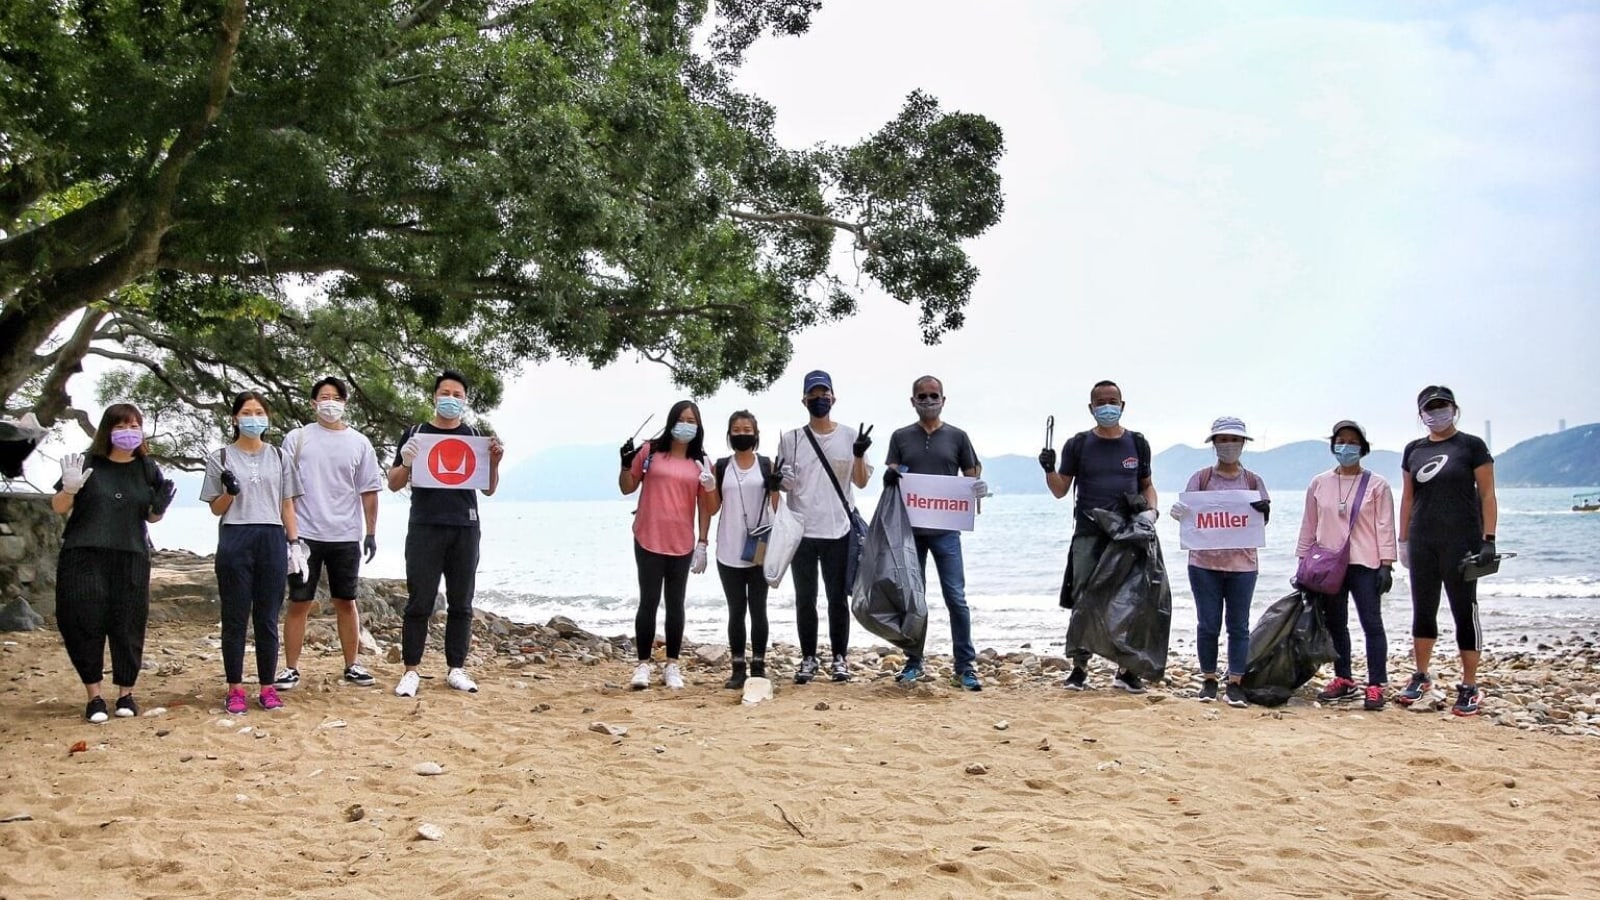 Twelve people are standing together on a beach holding rubbish bags that appear full with waste collected from the surrounding beach area.